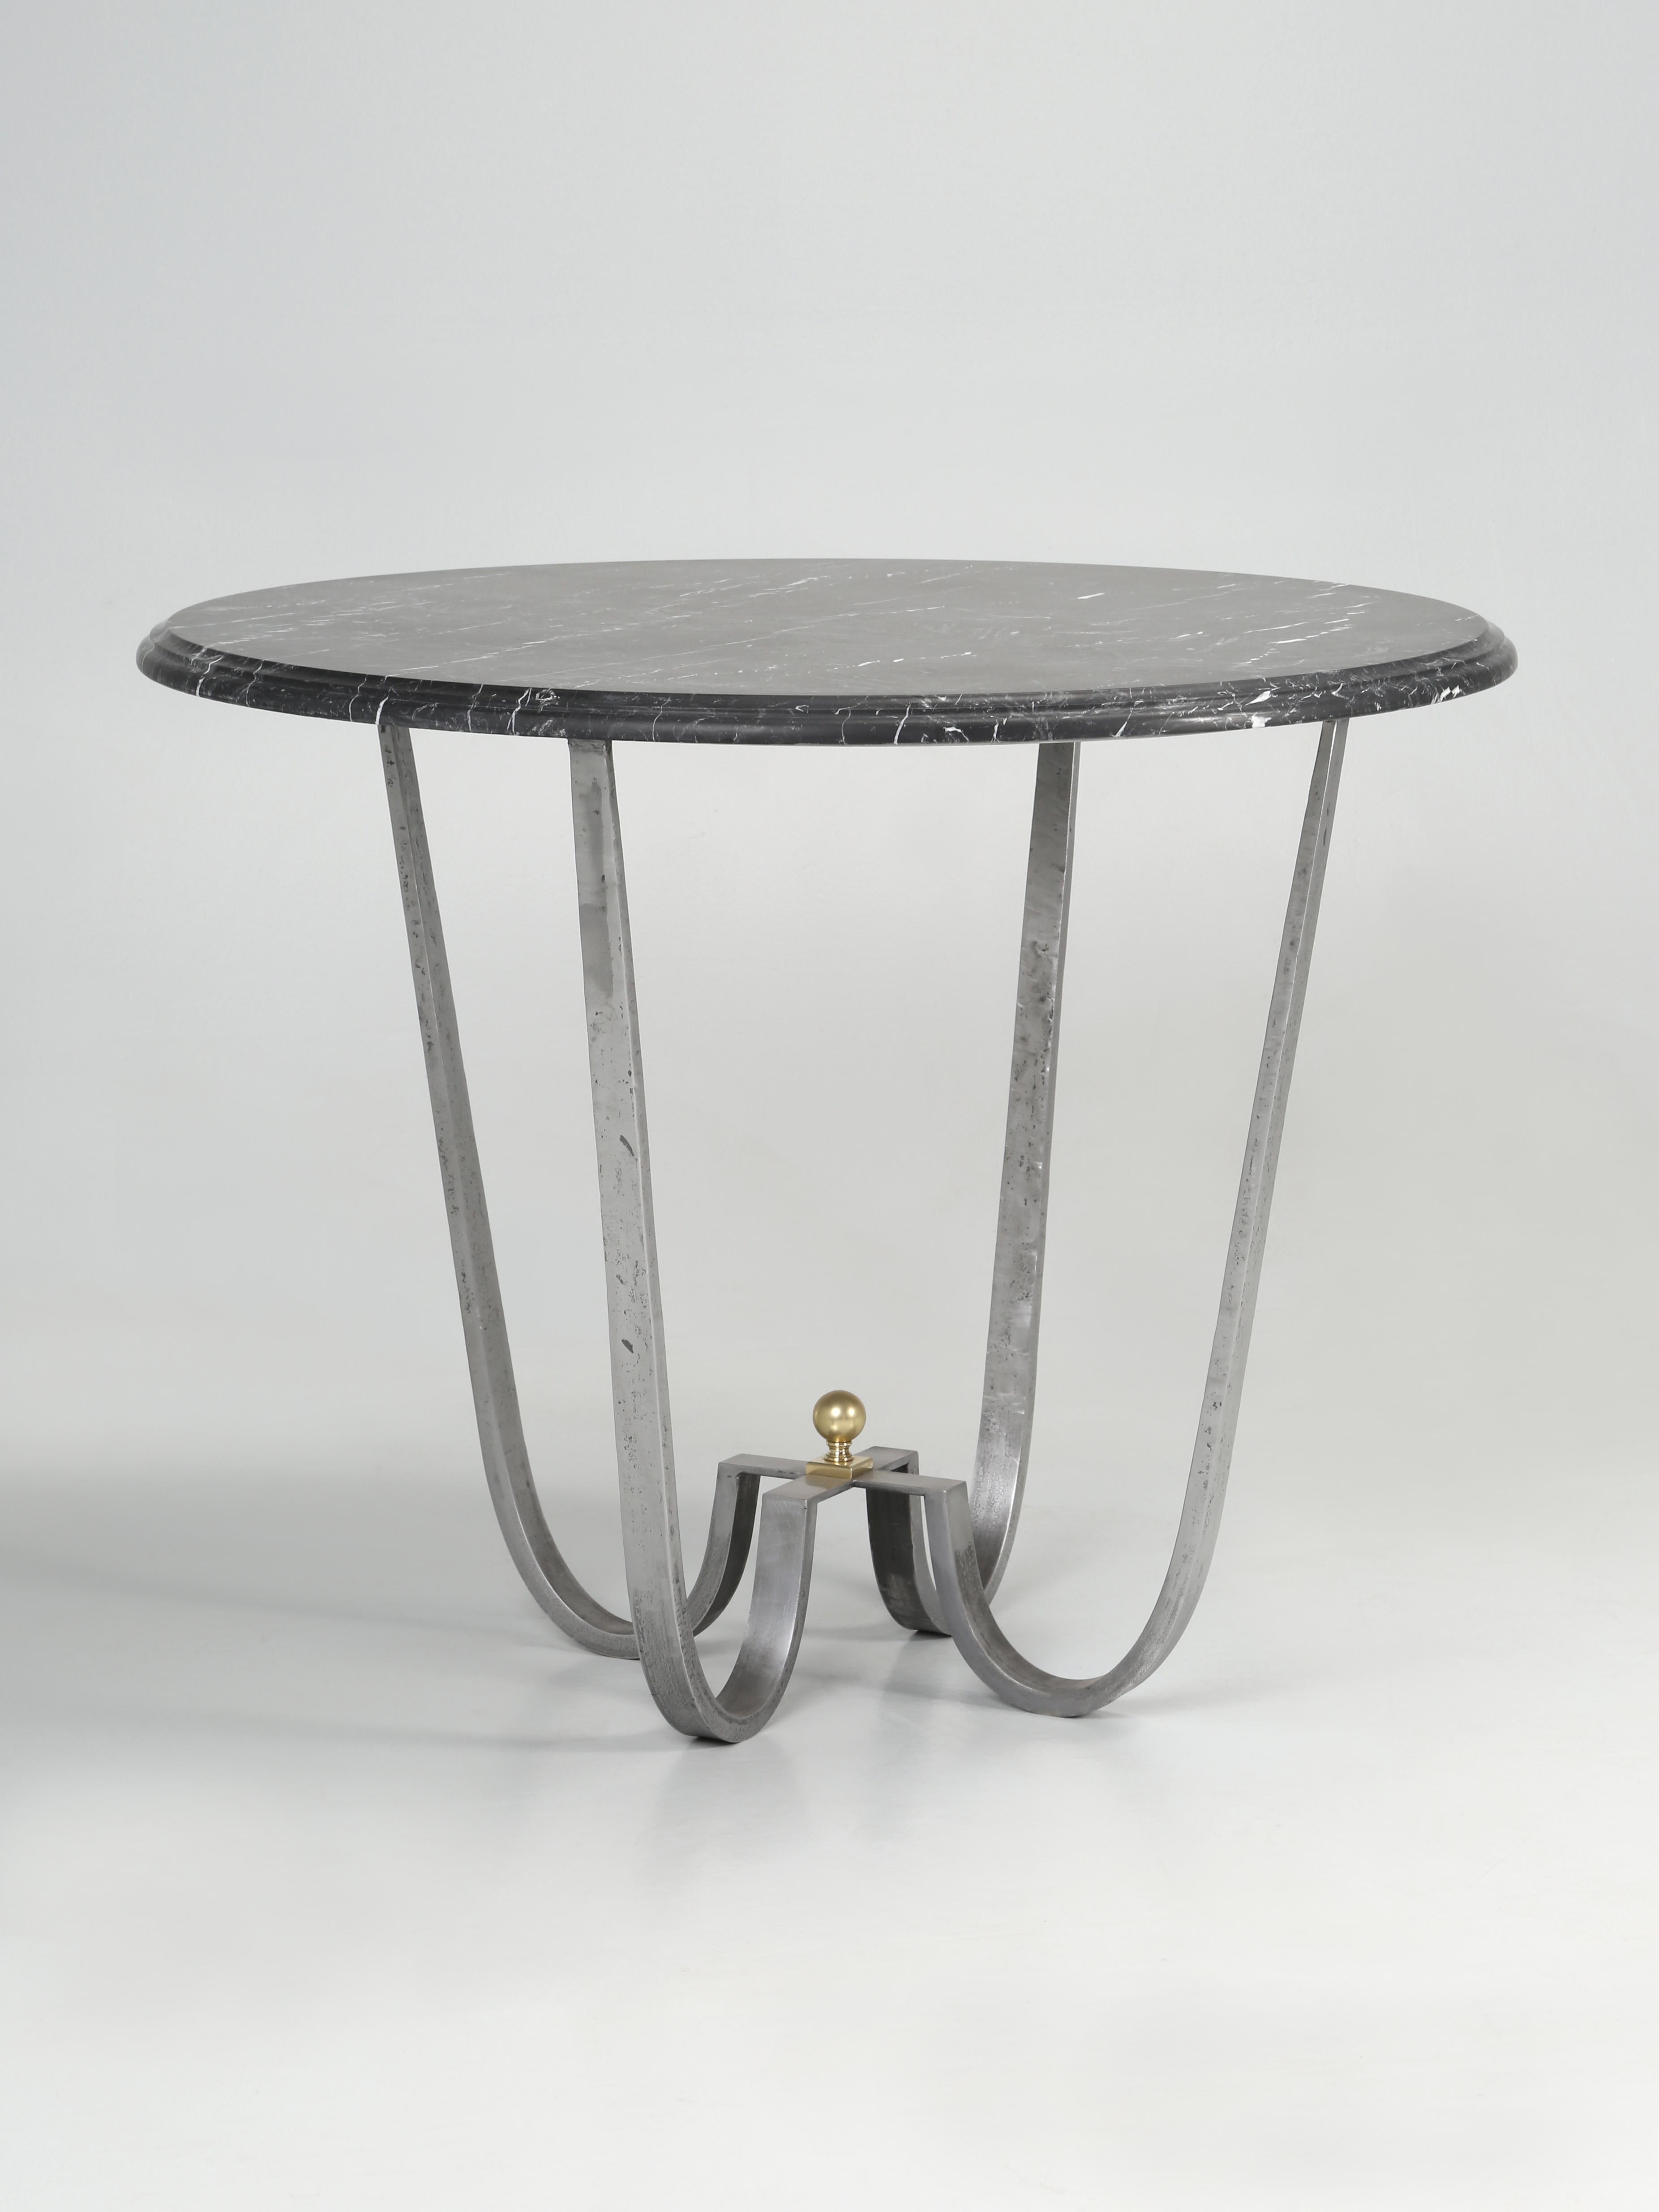 American Center Hall Table Mid-Century Modern Burnish Forged Steel Nero Marquina Any Size